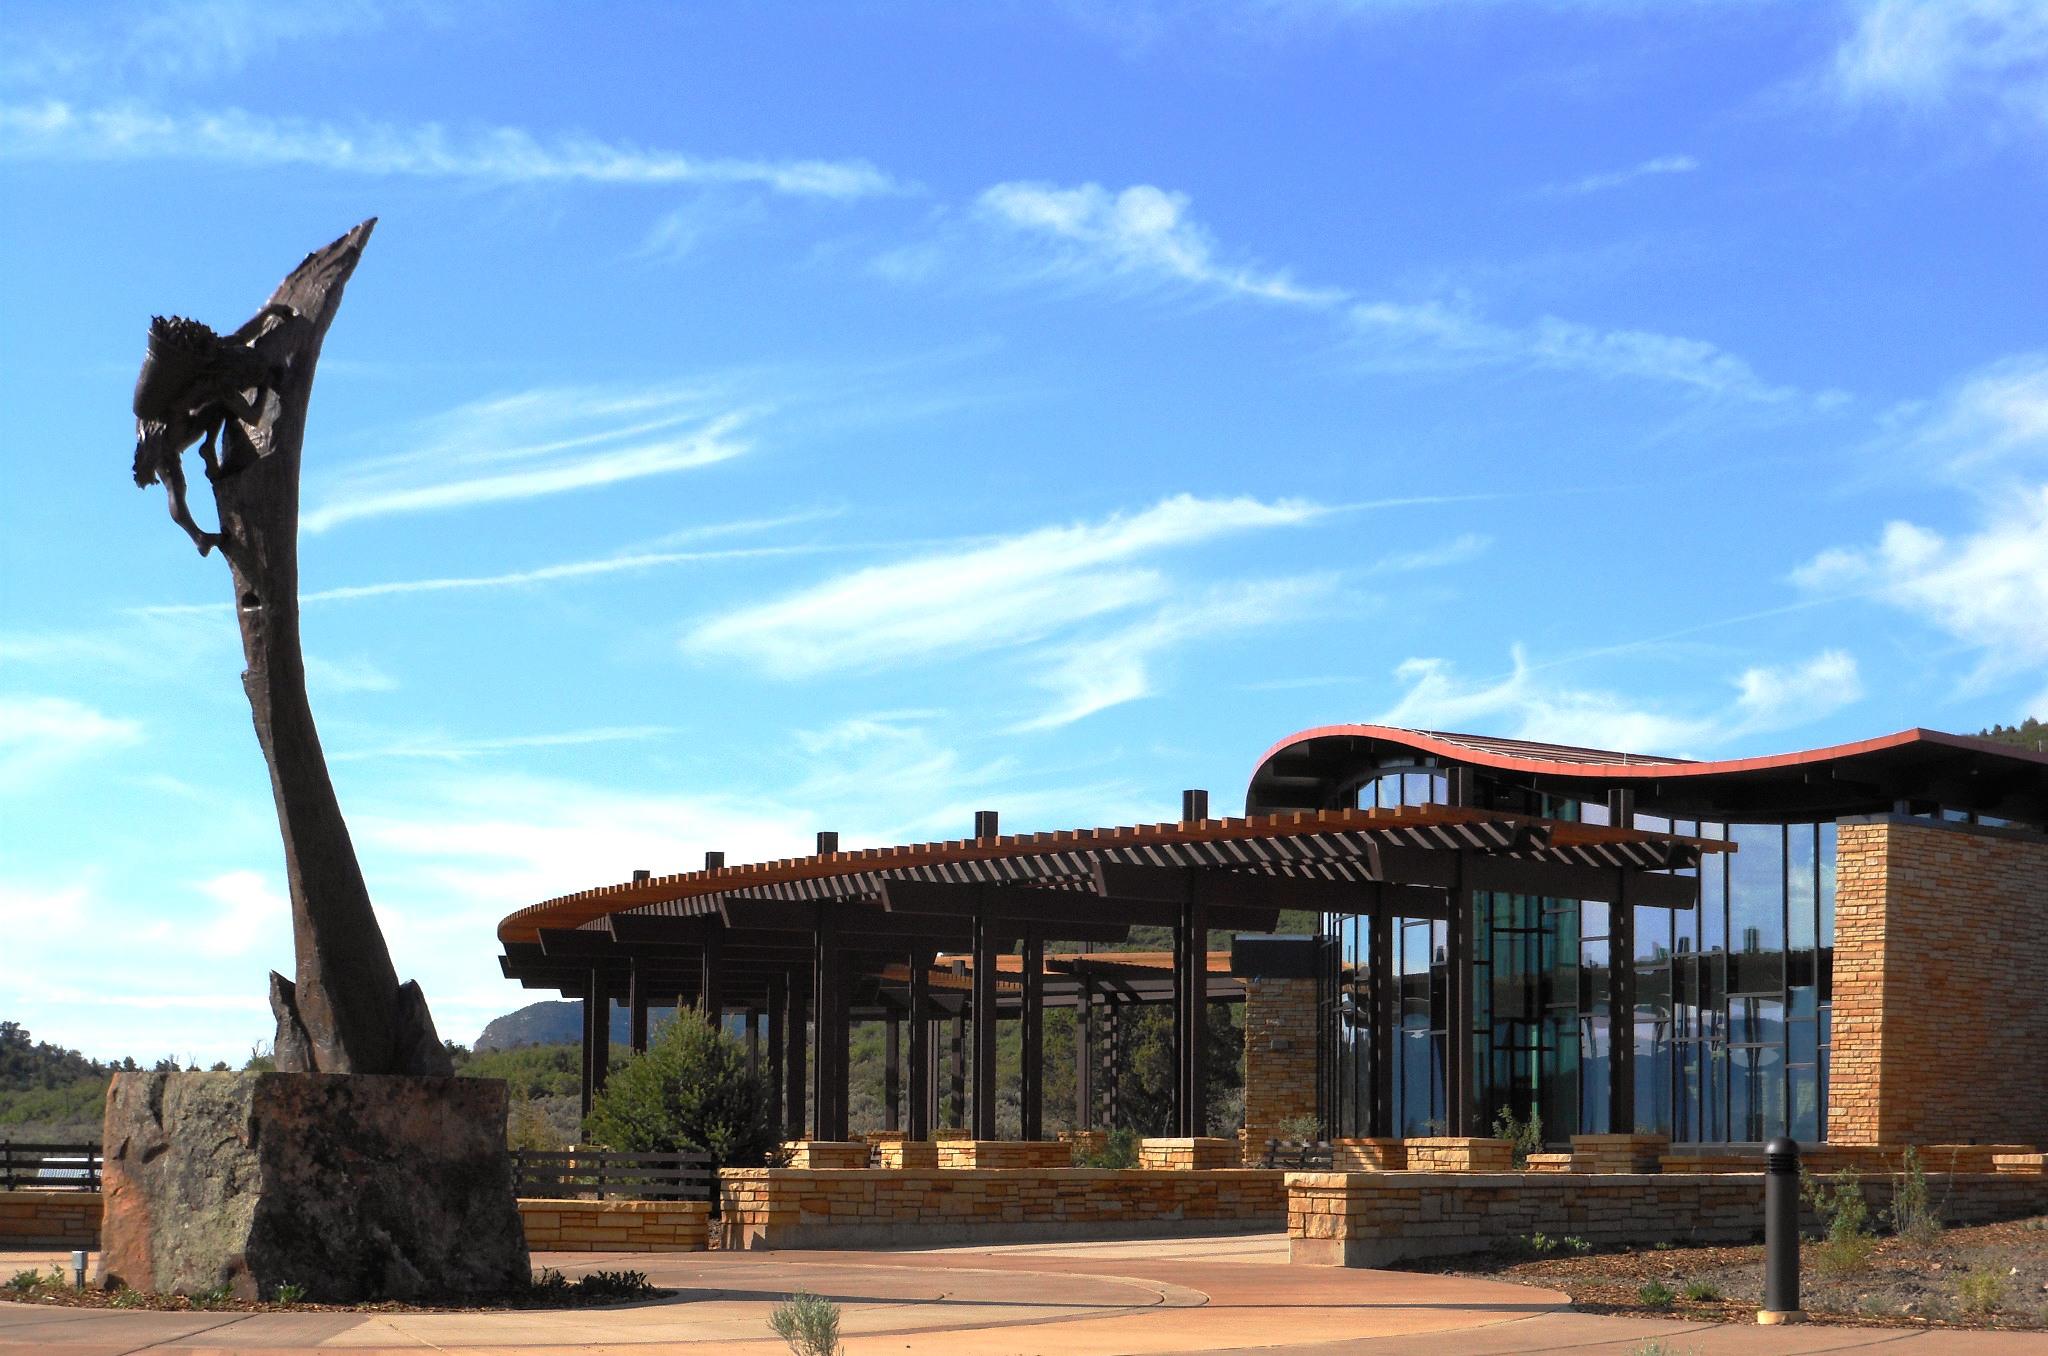 Visitor center entrance with sculpture of Ancestral Pueblo climber in front plaza.